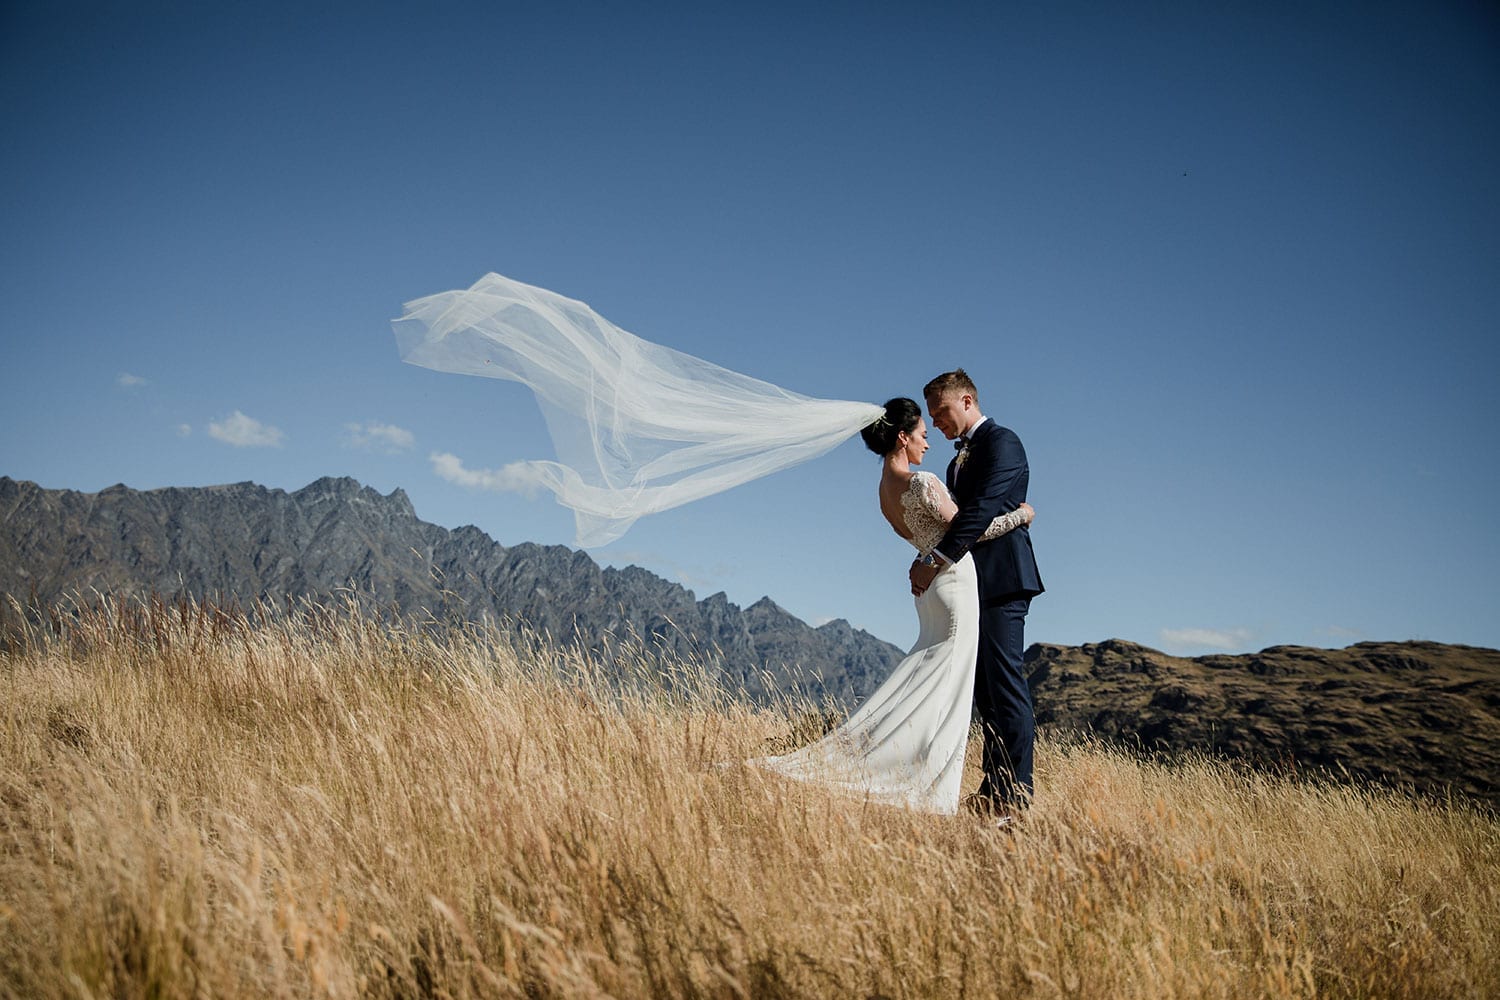 Vinka Design Features Real Weddings - bride in bespoke custom made gown with groom under veil in breeze with Queenstown with mountains in background